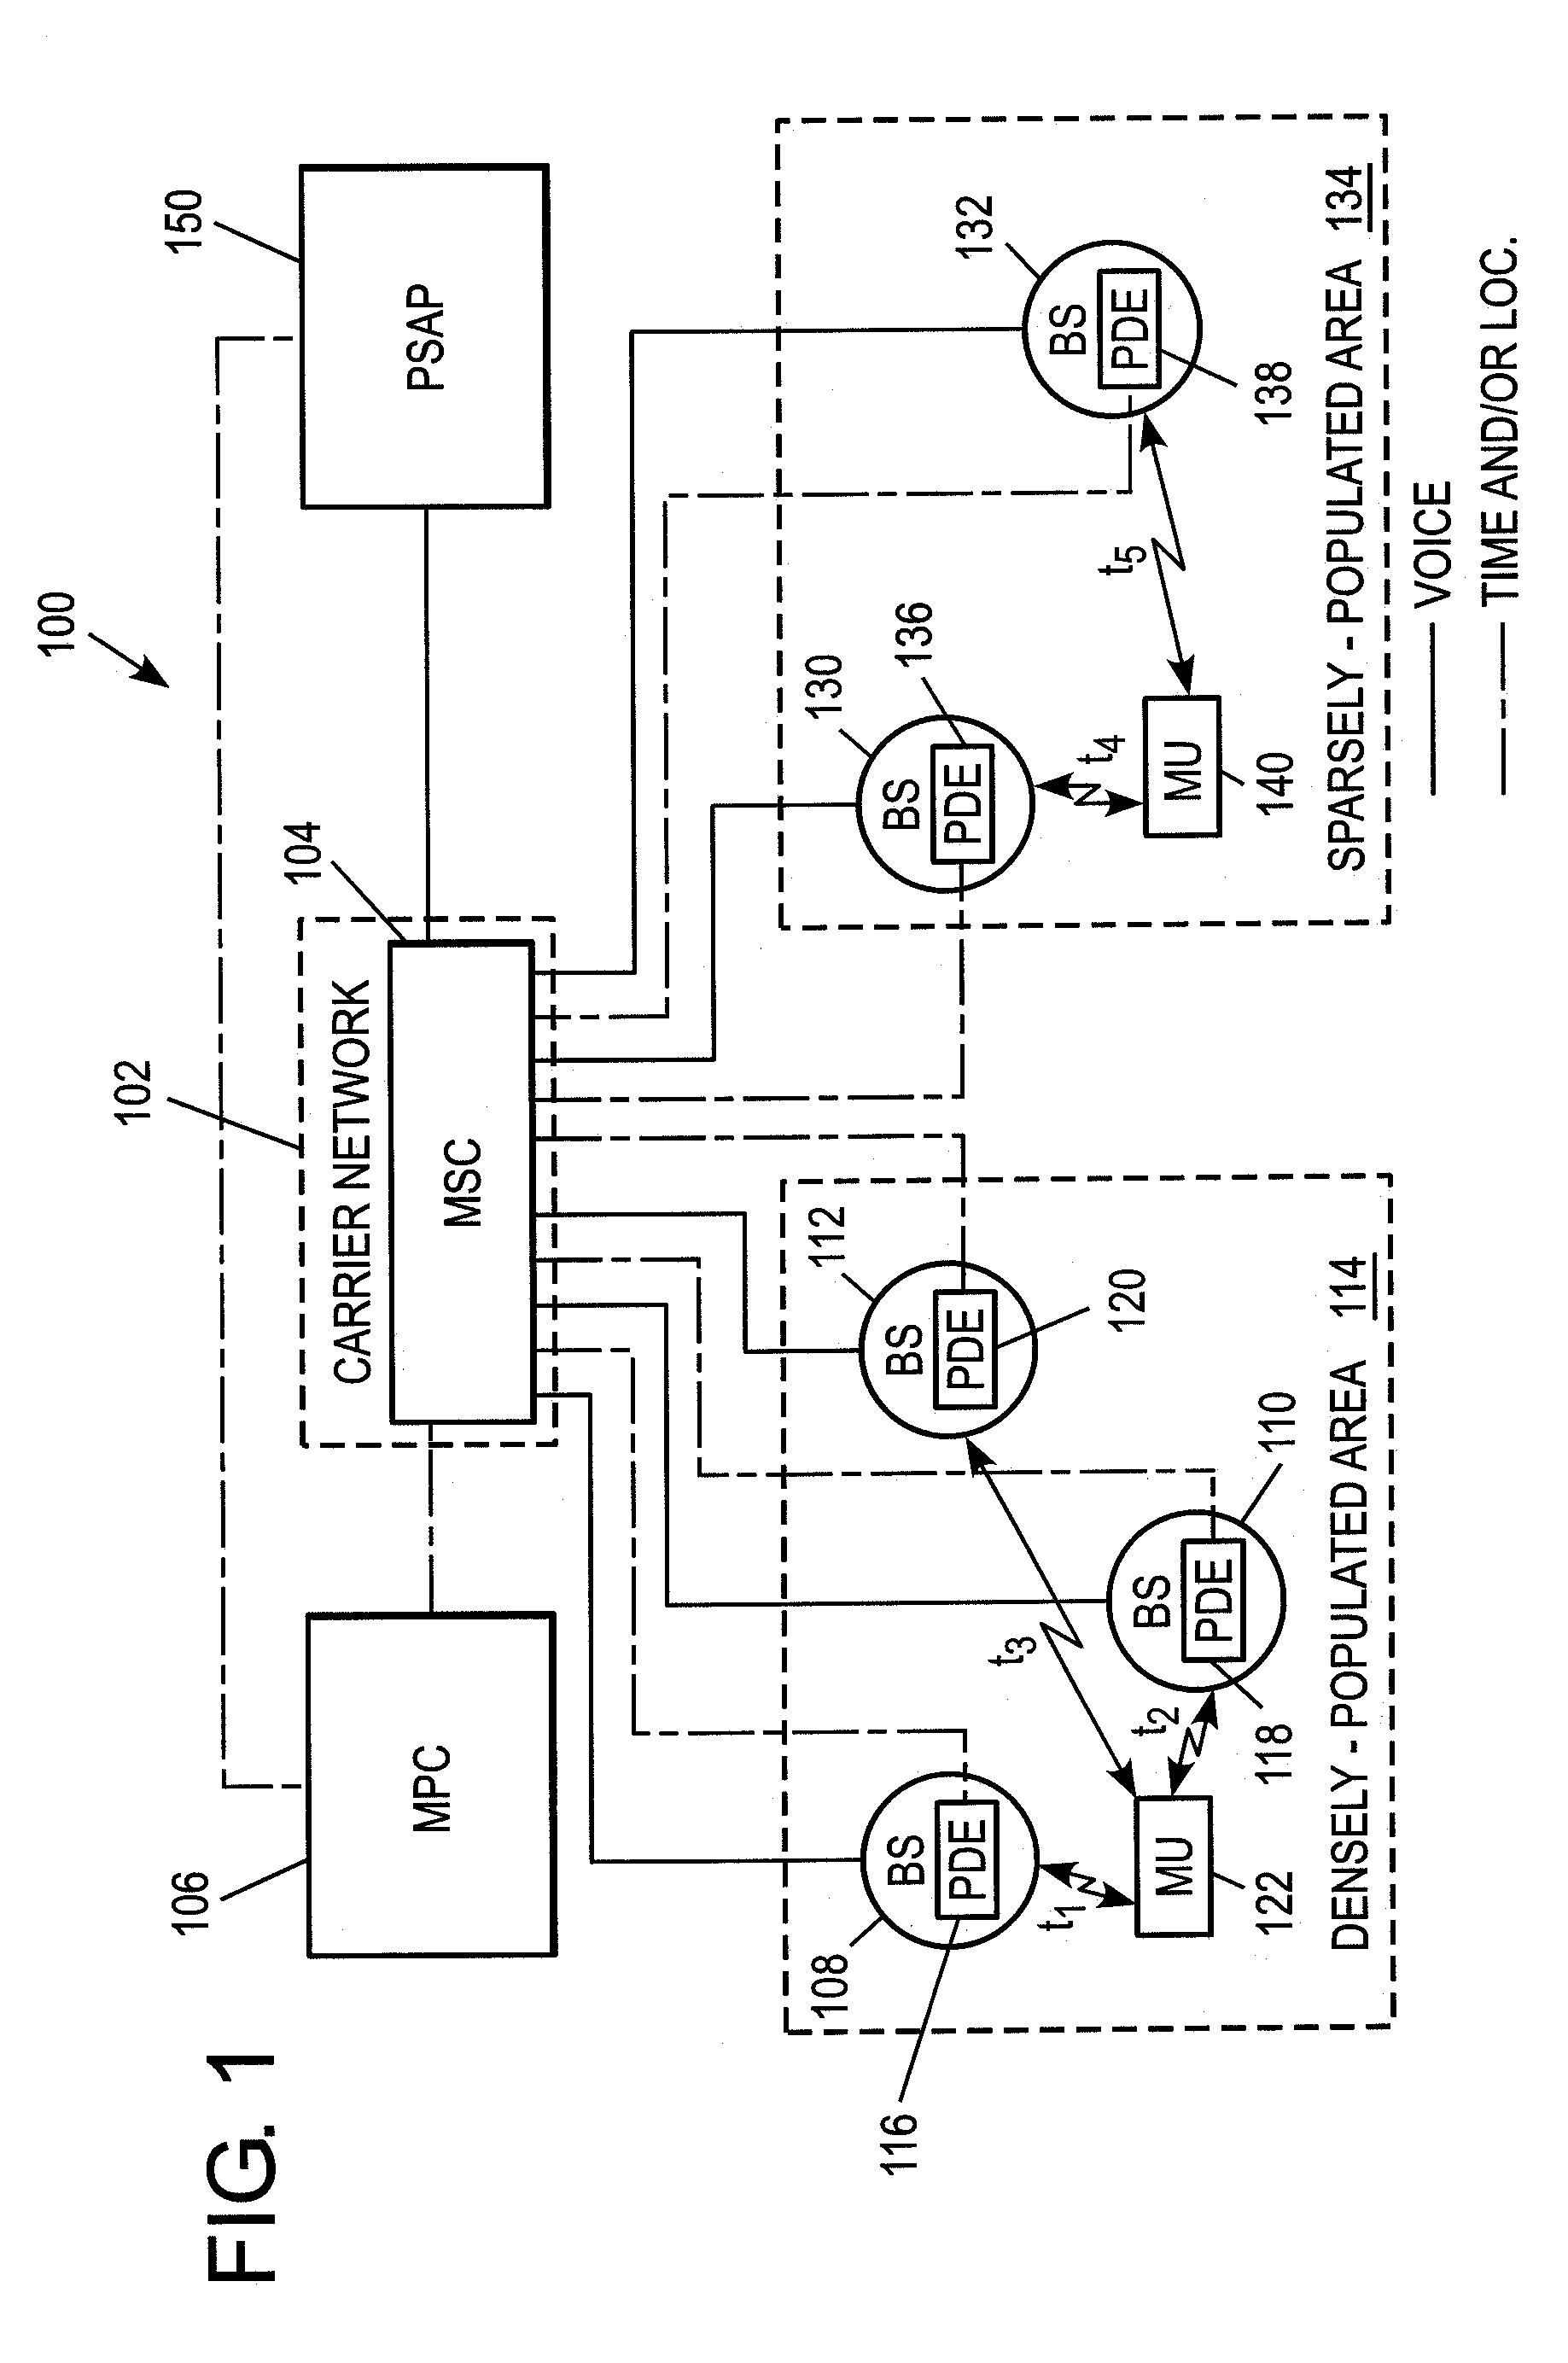 System and method for position equipment dusting in search and rescue operations